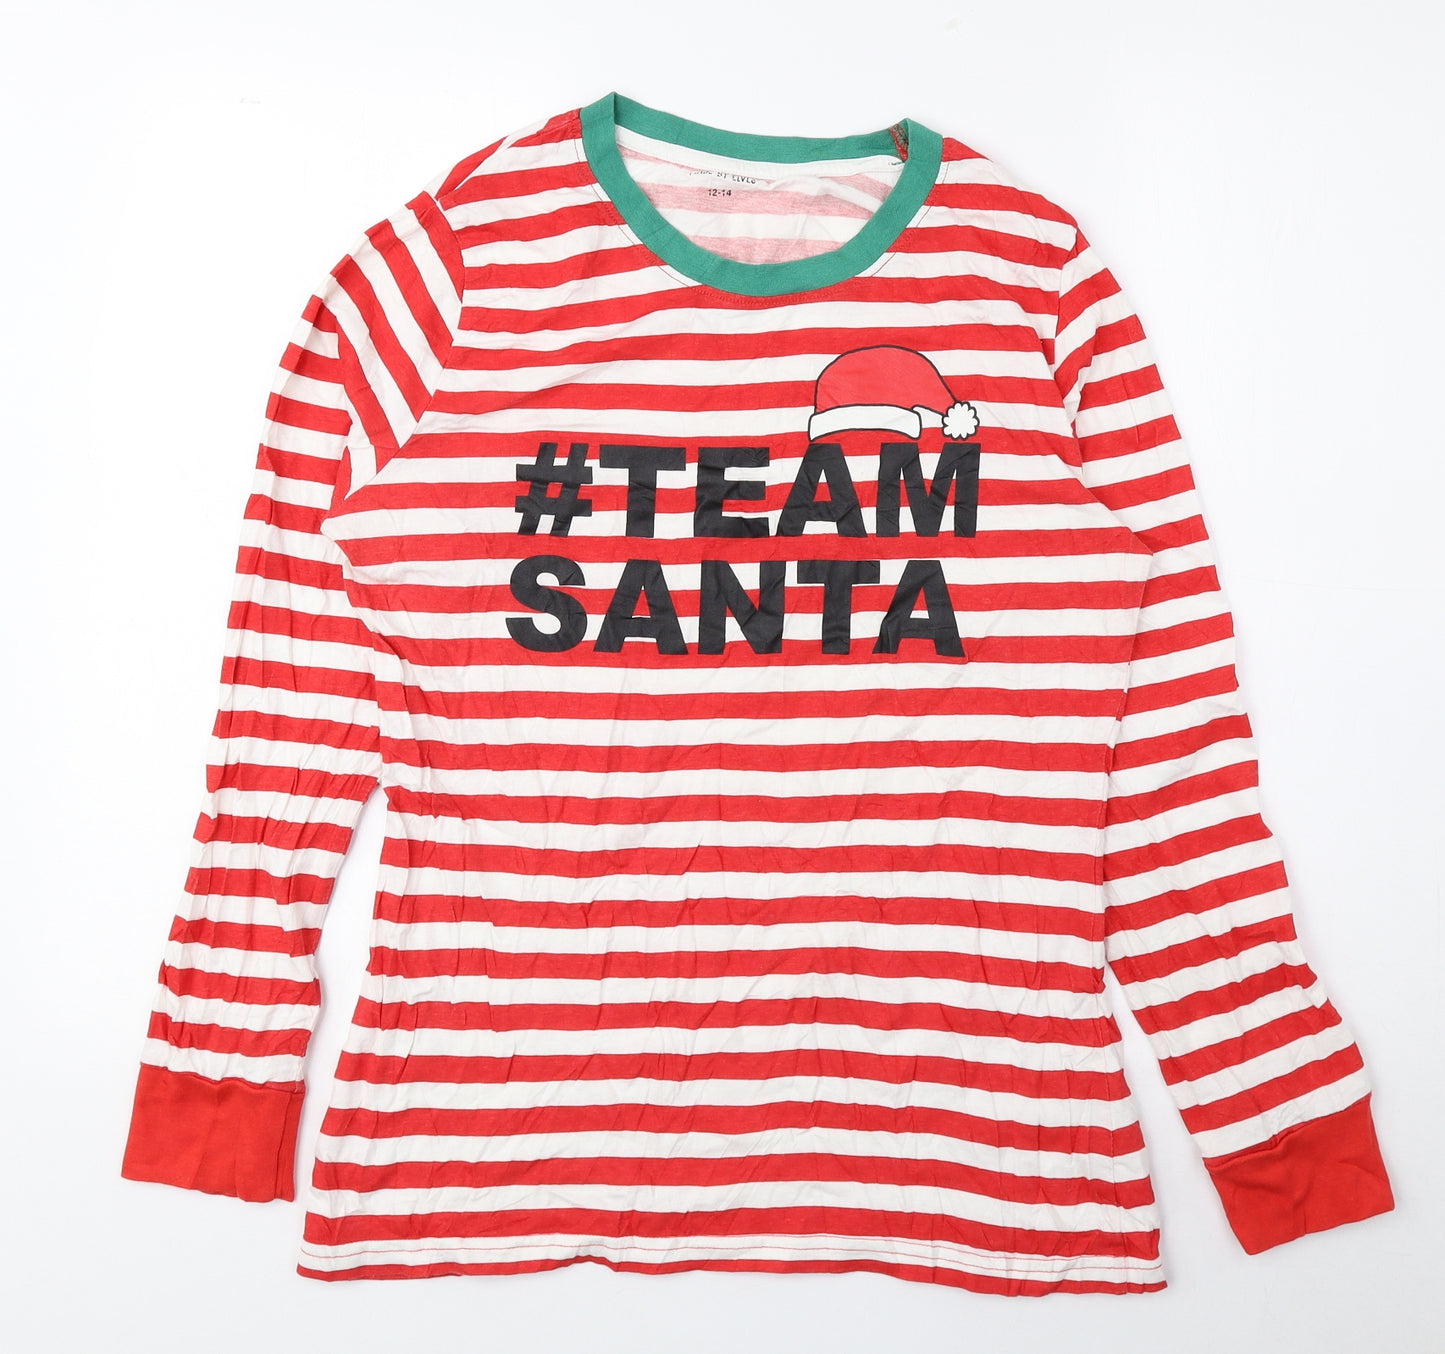 Made By Elves Womens Multicoloured Striped 100% Cotton Basic T-Shirt Size 12 Round Neck - #TEAMSANTA